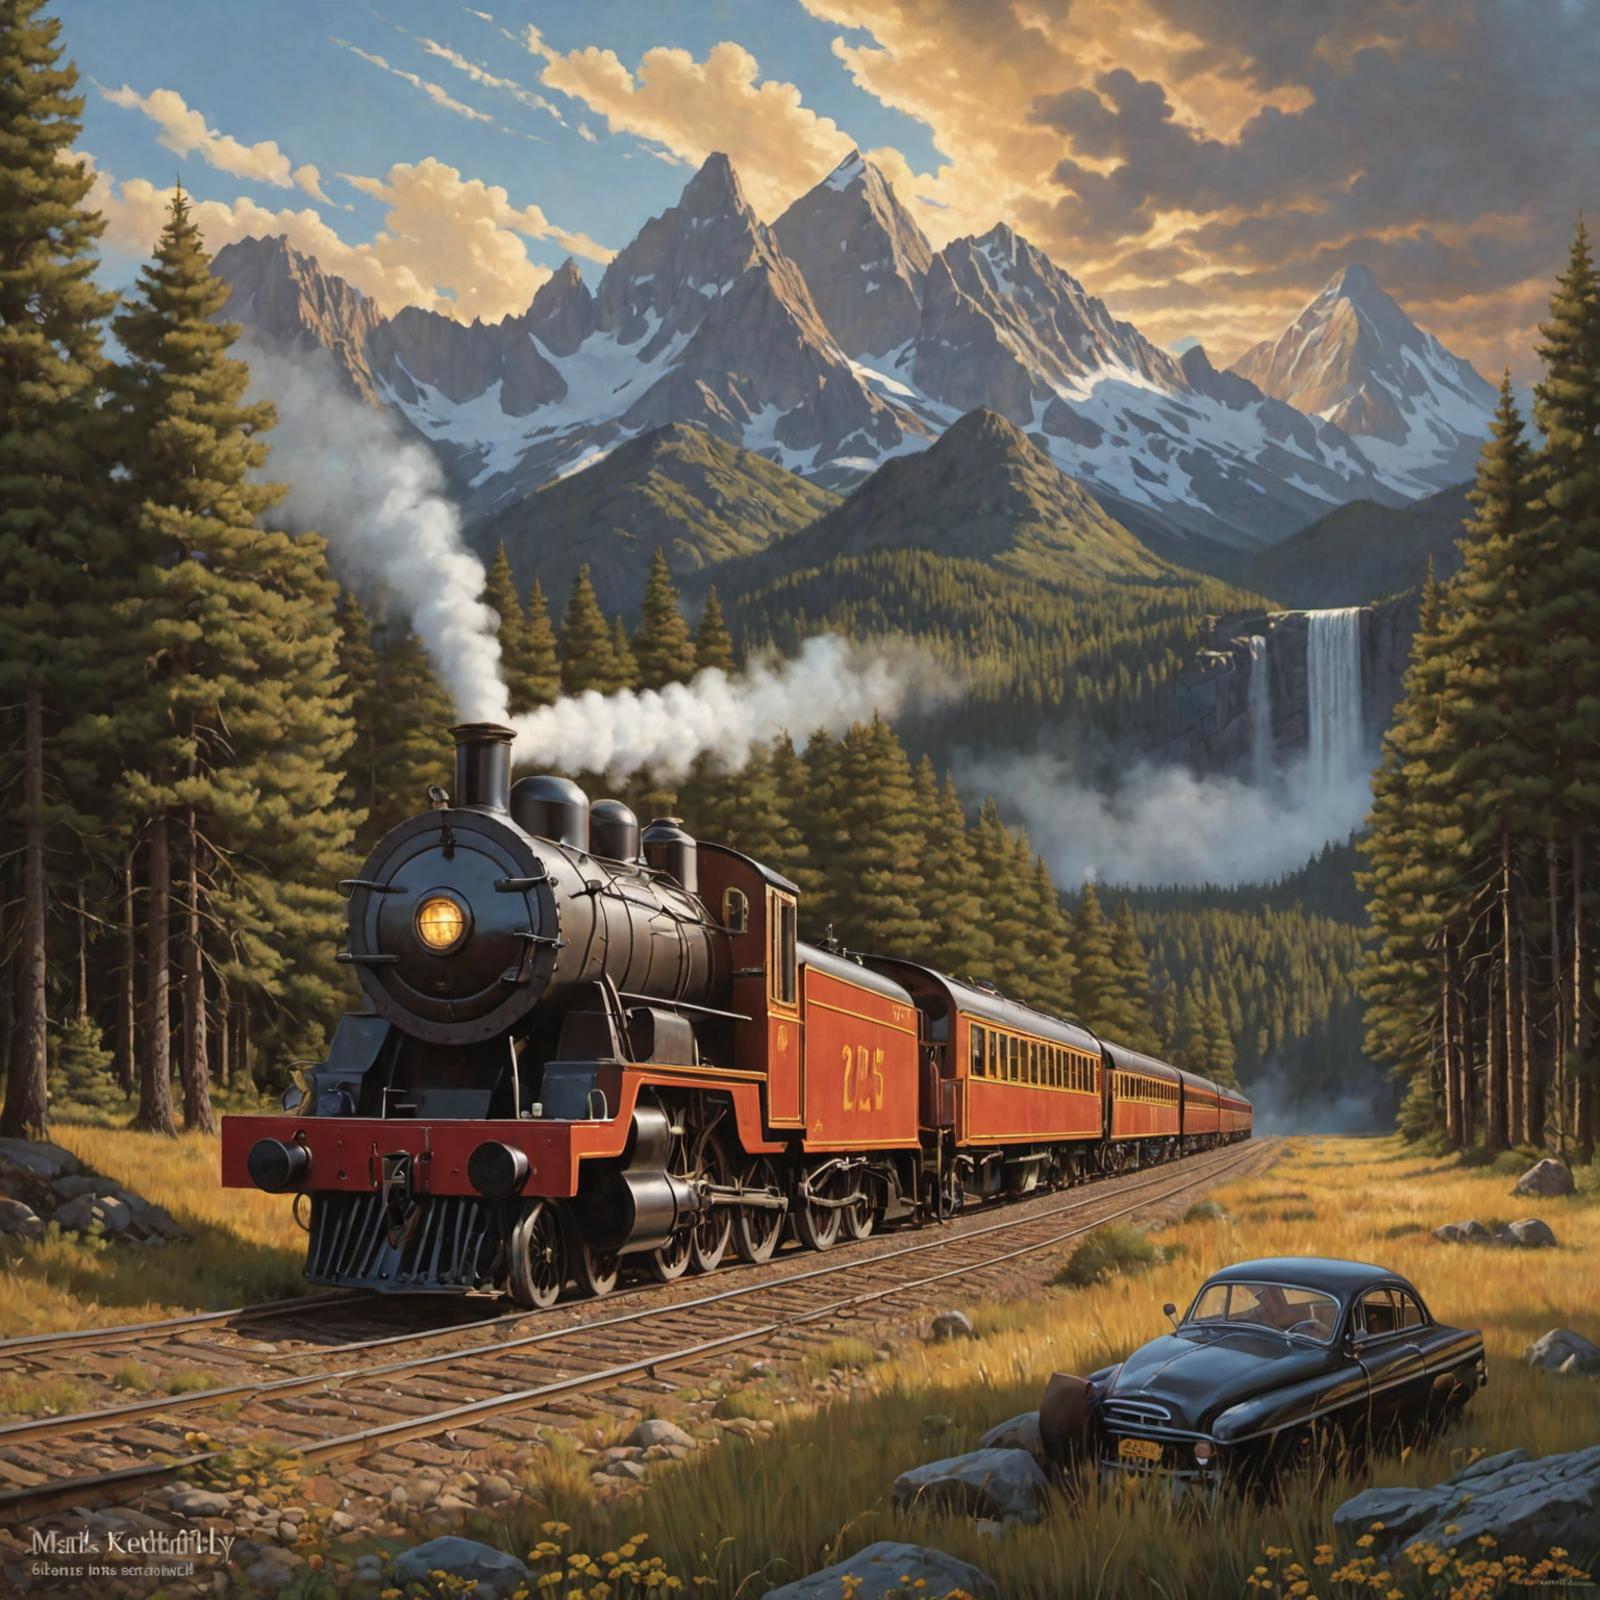 A Red Train on the Tracks in a Mountainous Setting